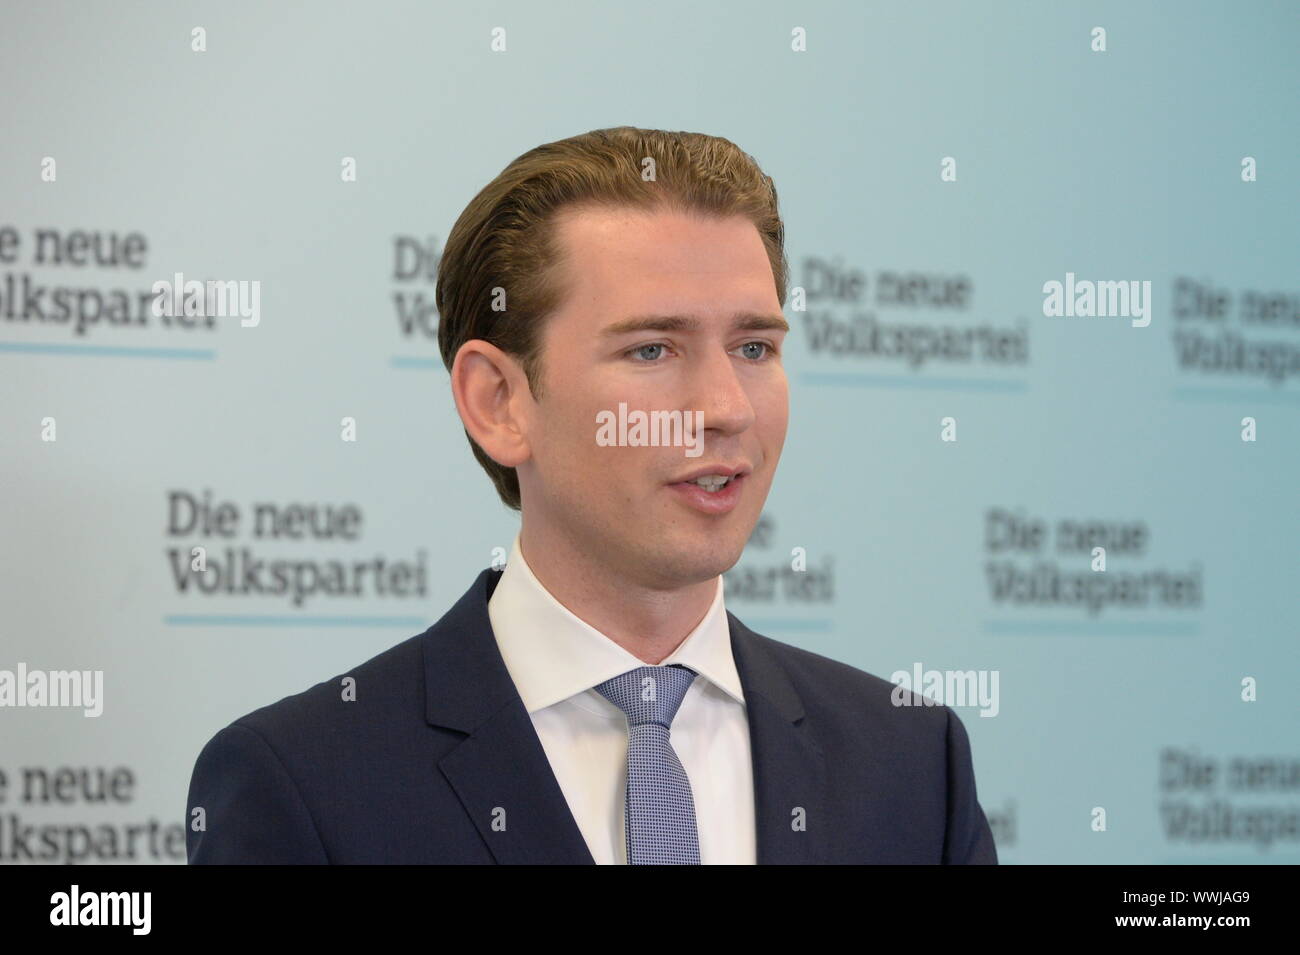 Vienna, Austria. 16th September, 2019. PRESS CONFERENCE on Presentation '100 projects for Austria' Part 2: Justice with federal party chairman Sebastian Kurz (List Sebastian Kurz, New People's Party) on 16 September 2019. Credit: Franz Perc/Alamy Live News Stock Photo